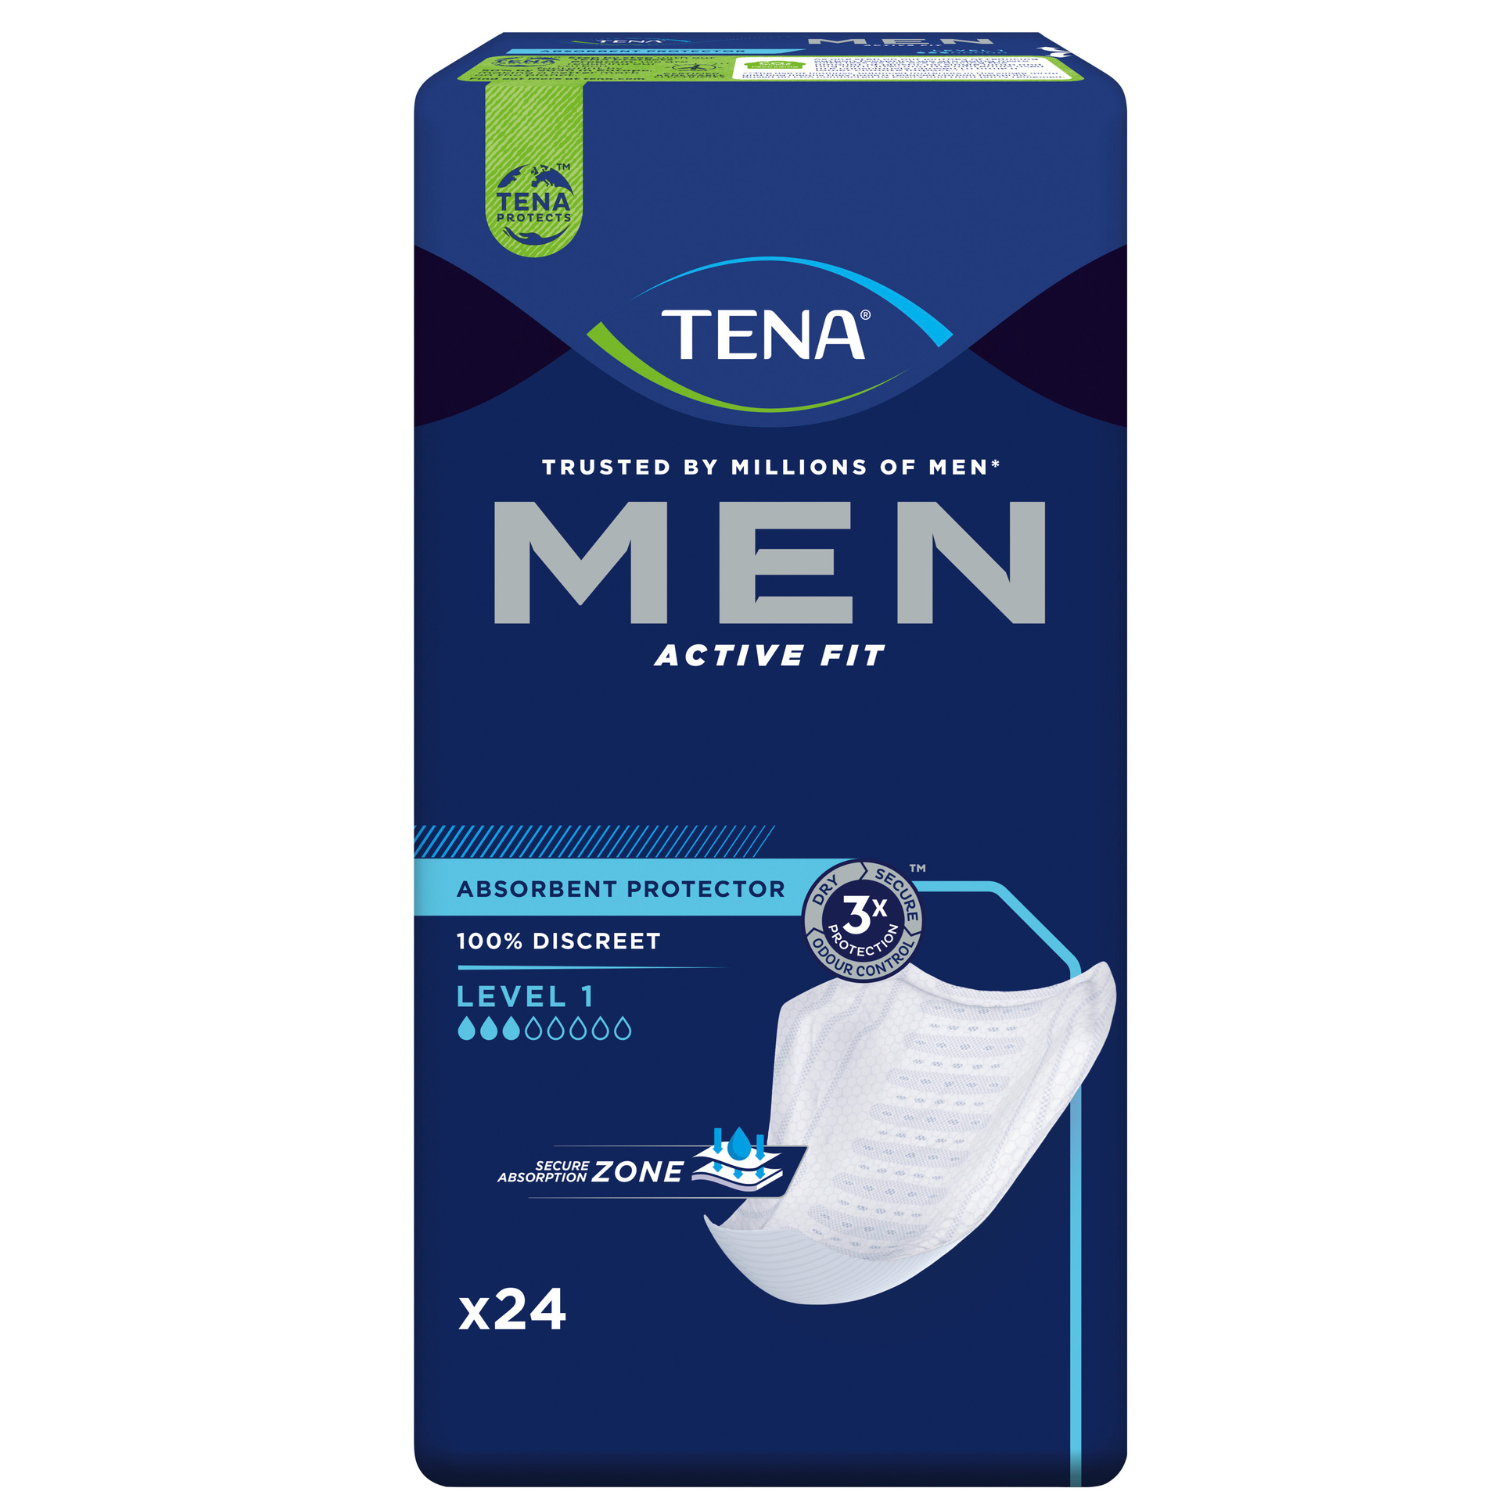 TENA Men Active Fit Absorbent Protector Level 3 710ml 8 Pack